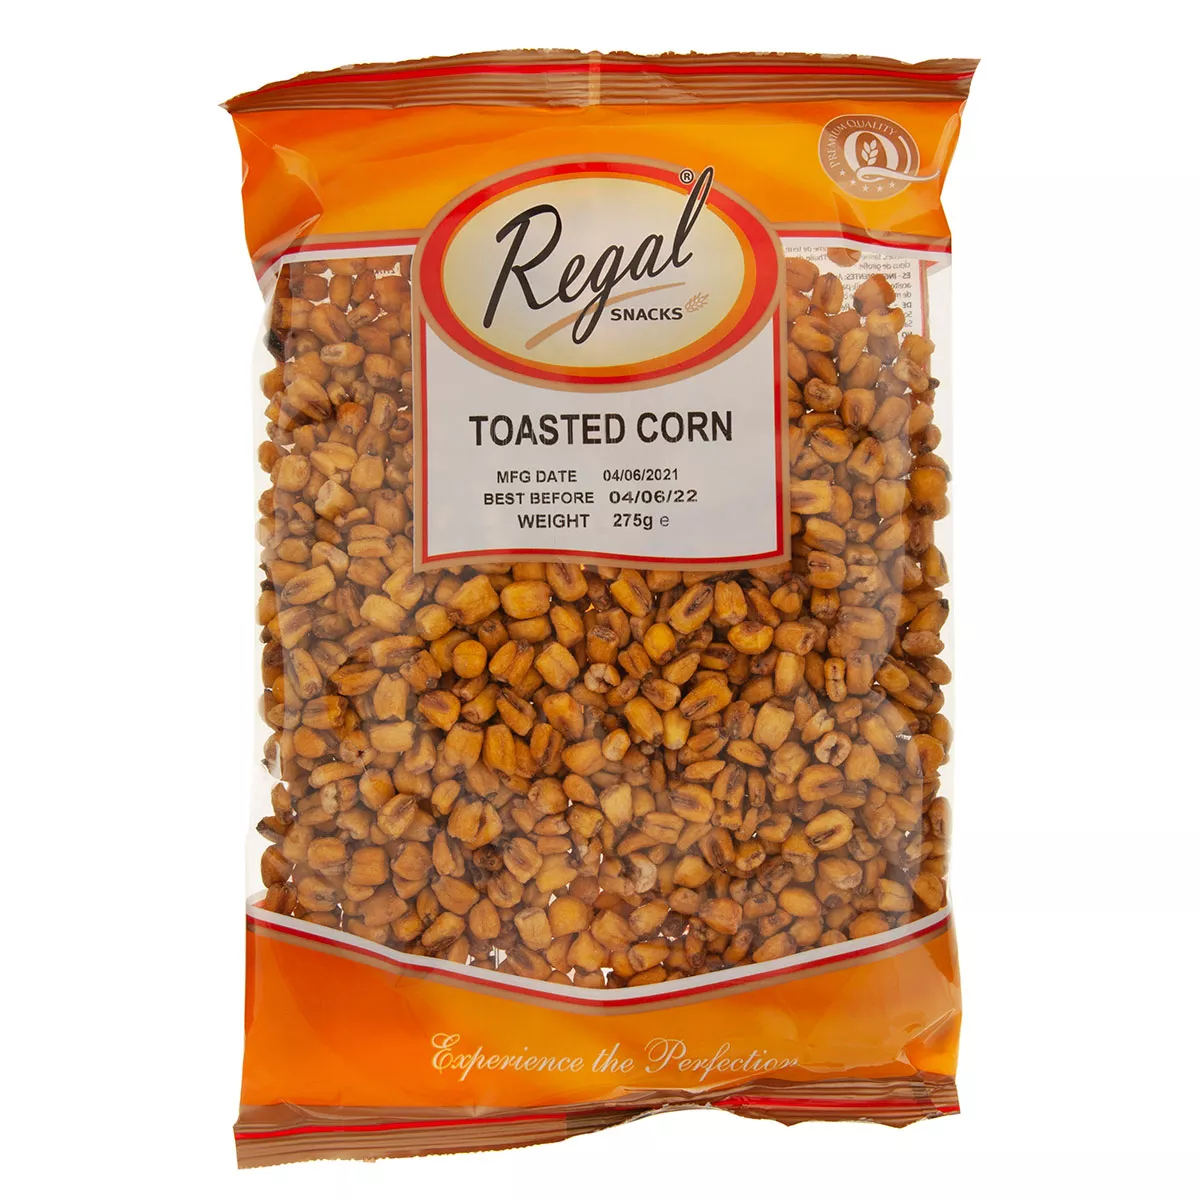 Regal Toasted Corn 250g